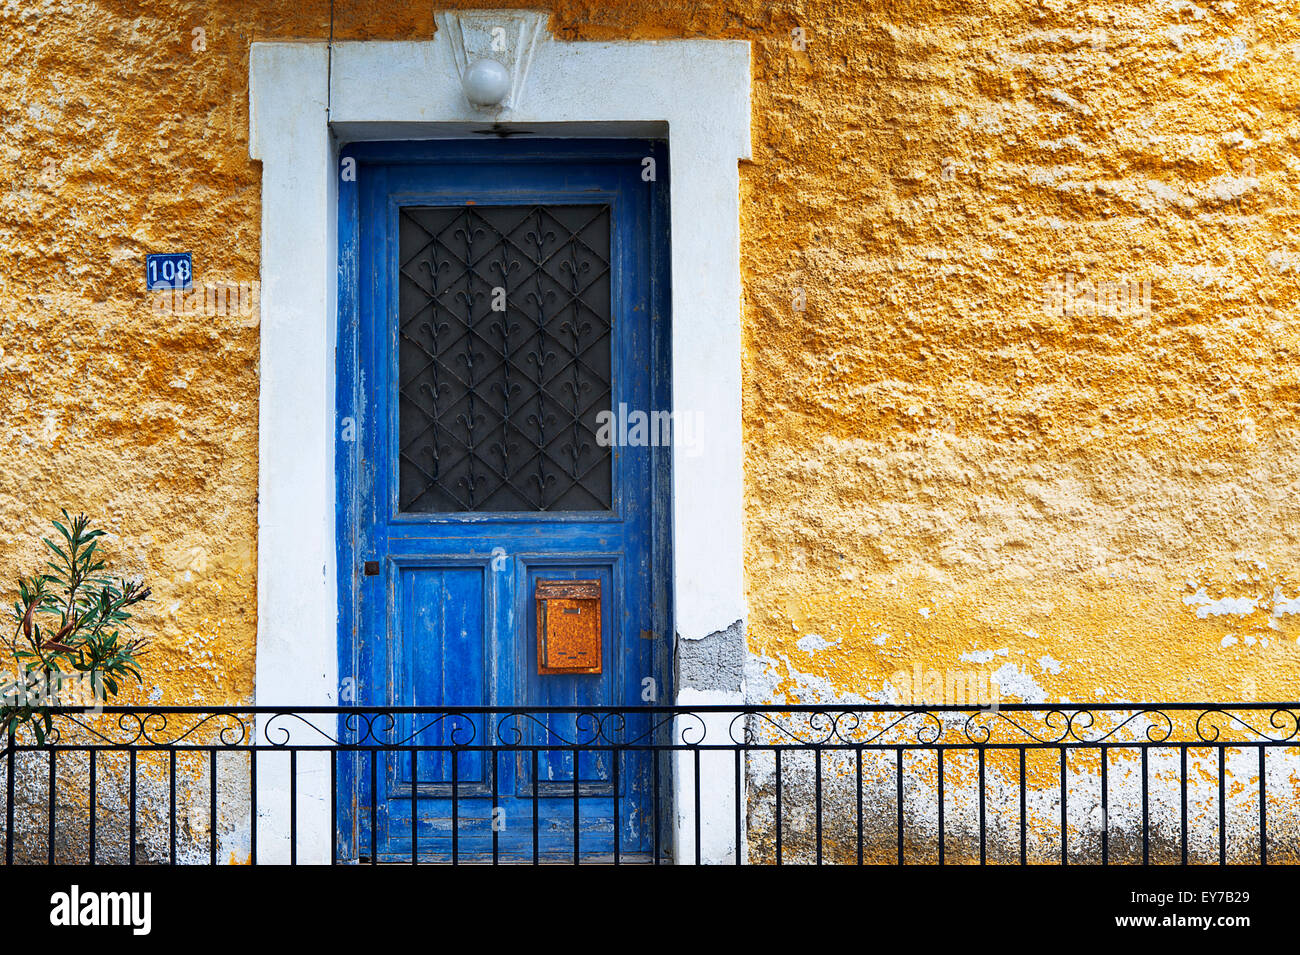 Blue front door in yellow house front (Pelion Peninsula, Thessaly, Greece). Stock Photo